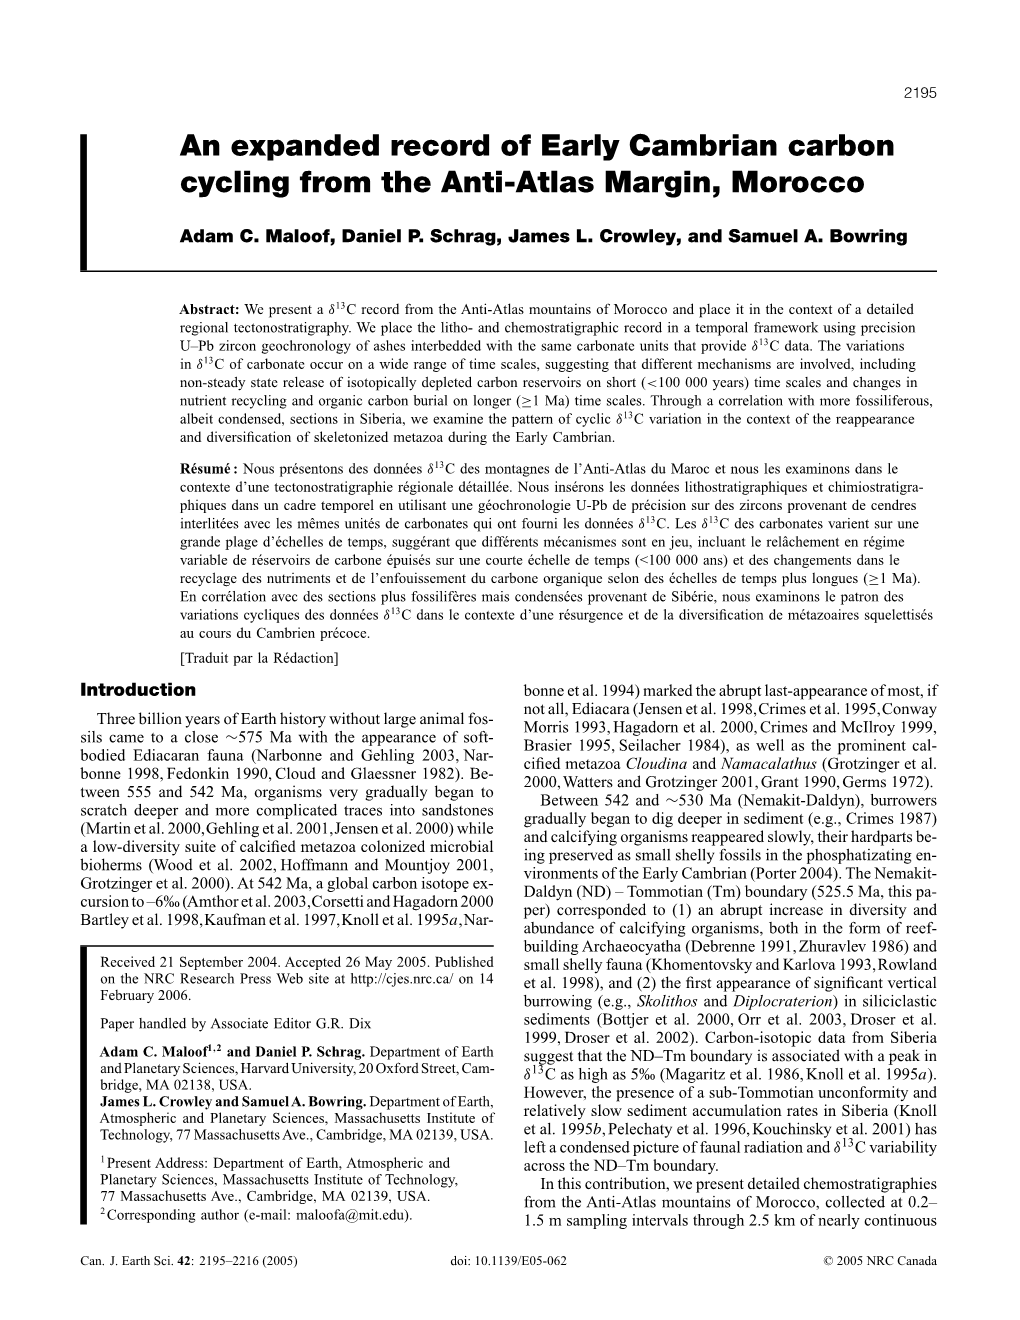 An Expanded Record of Early Cambrian Carbon Cycling from the Anti-Atlas Margin, Morocco